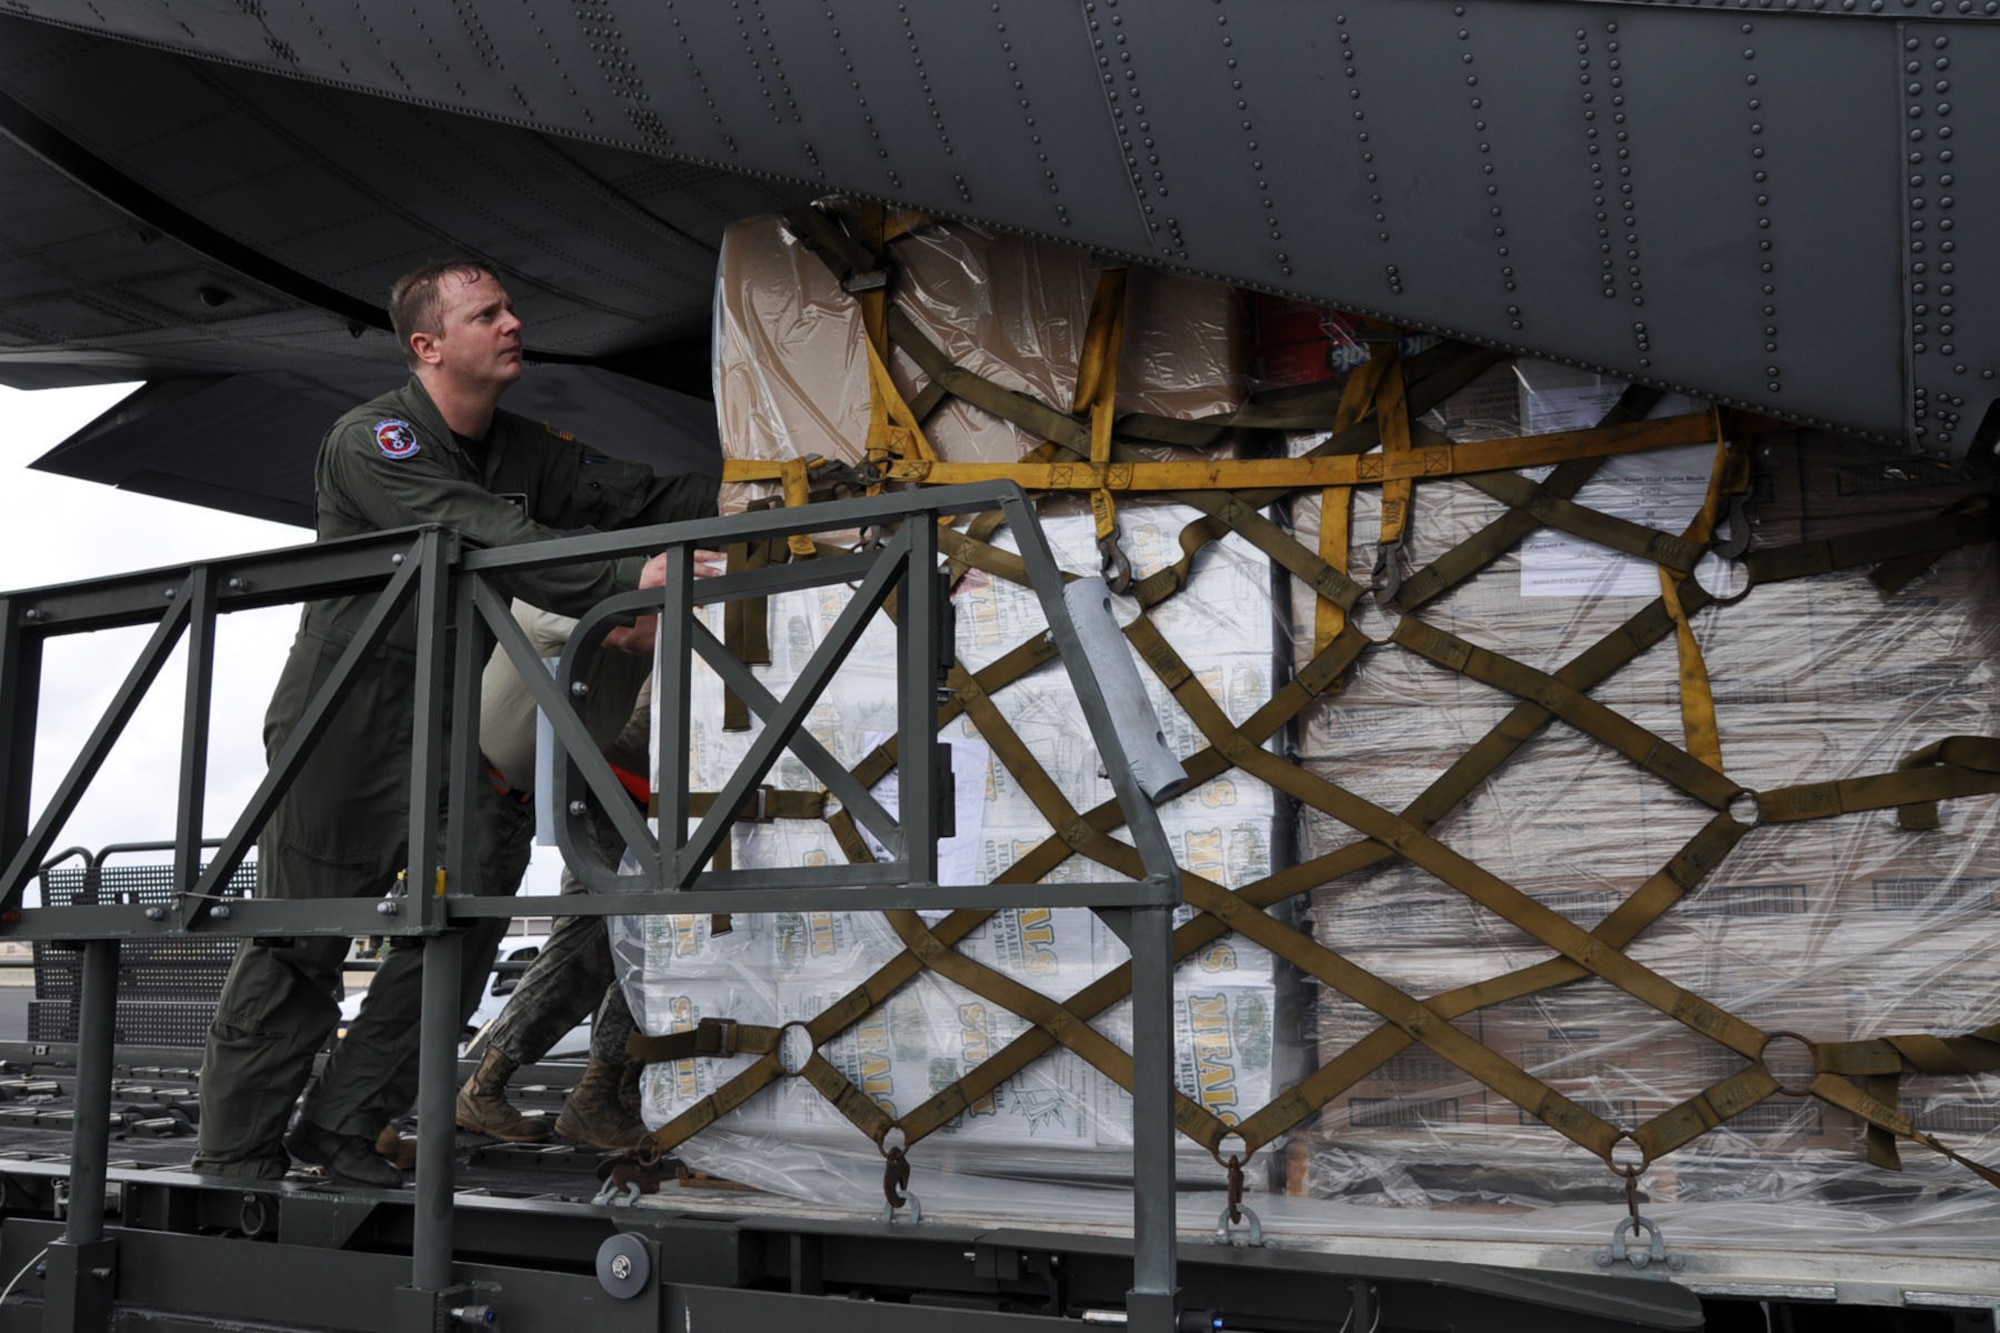 HOMESTEAD AIR RESERVE BASE, Florida -- U.S. Air Force Reserve Master Sgt. Dan Marhulik, a loadmaster assigned to the 910th Airlift Wing, works with a group of Air Force personnel to push a pallet of ready-to-eat meals onto the rear cargo ramp of a C-130H Hercules cargo aircraft on the flightline here, January 21. The pallet is part of a cargo of 18,400 pounds of food and water that the aircraft, based at Youngstown Air Reserve Station, Ohio, will carry to San Isidiro Air Base, Dominican Republic, where it will be trucked across the island to Port-au Prince, Haiti as part of the massive international effort to provide relief to the people of the Caribbean island nation in the aftermath of a devastating January 12 earthquake. U.S. Air Force photo by Master Sgt. Bob Barko Jr.